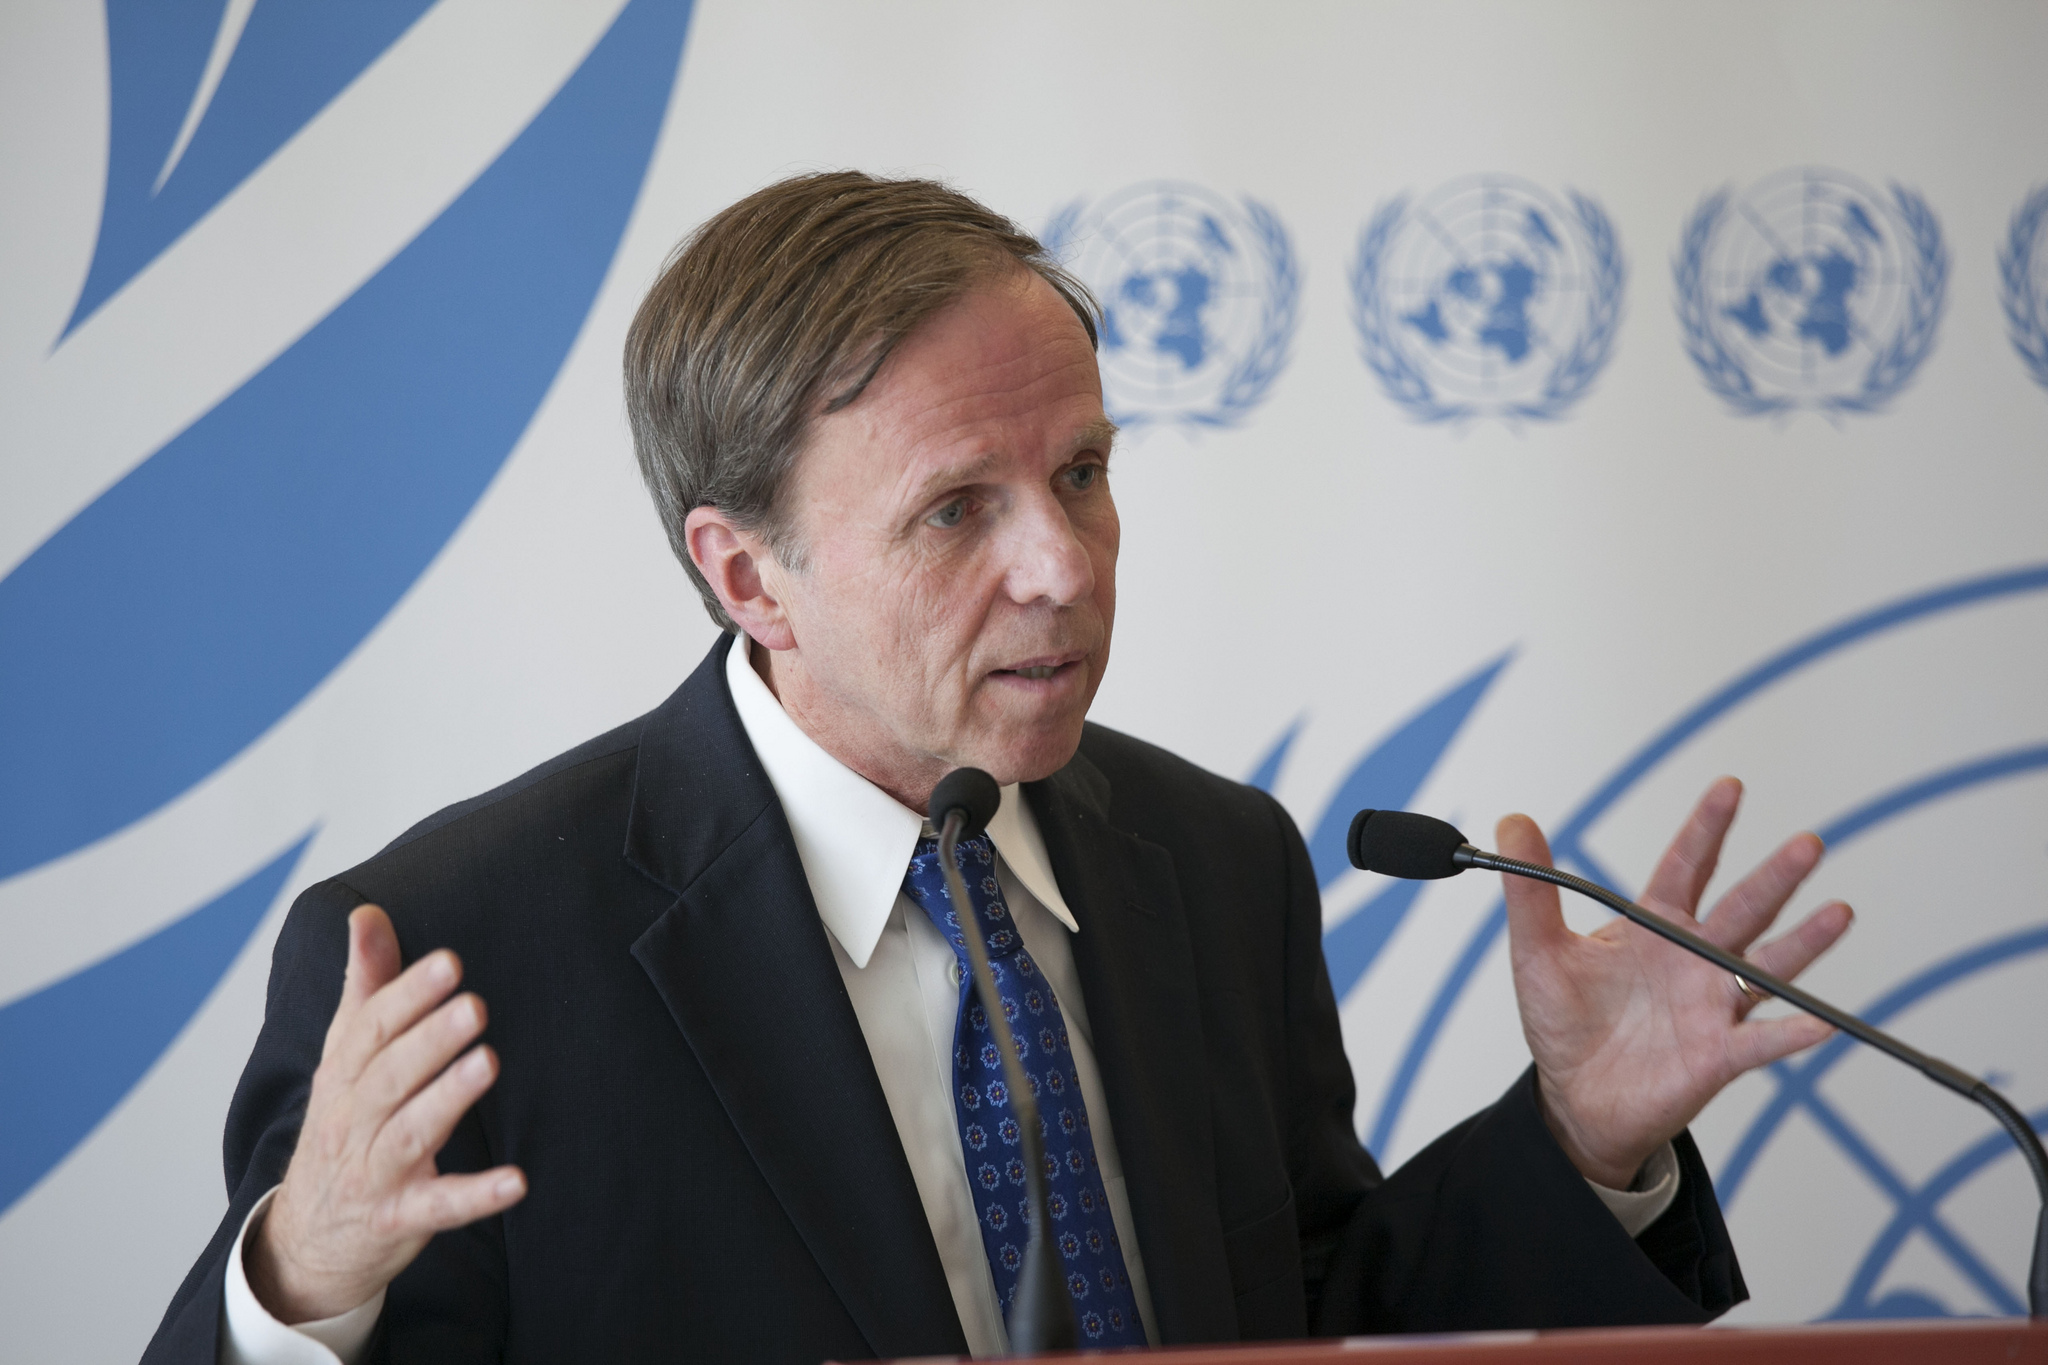  Michael Posner speaking at the UN Human Rights Council in 2012. 